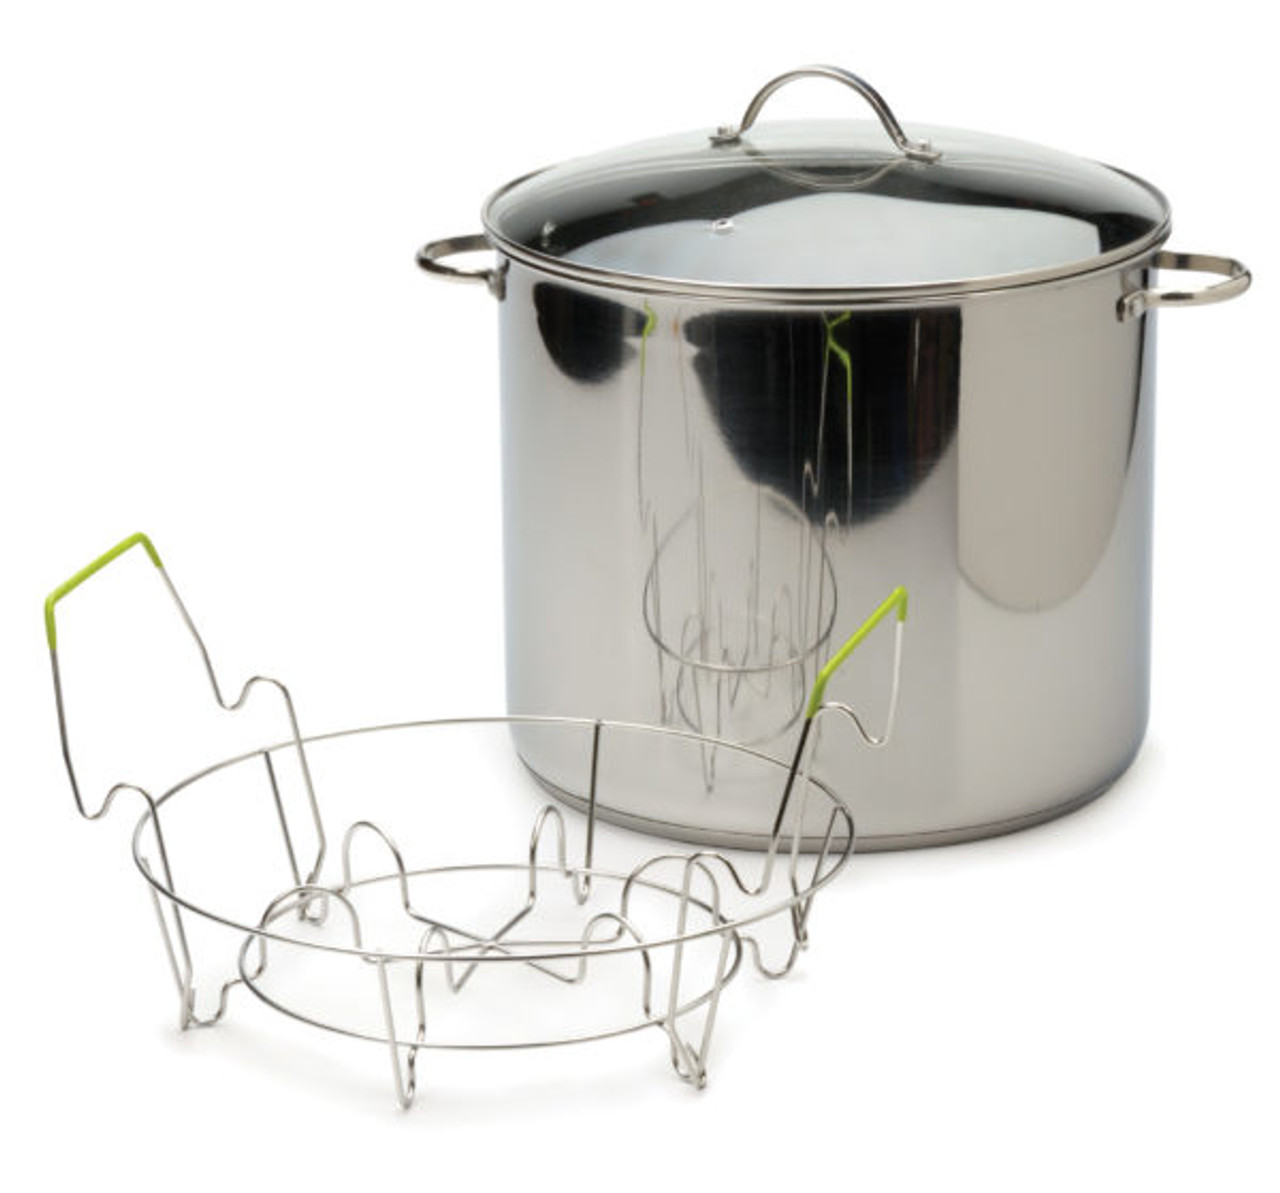 Stainless Steel Stockpot Canning Pasta Pot for Cooking Simmering